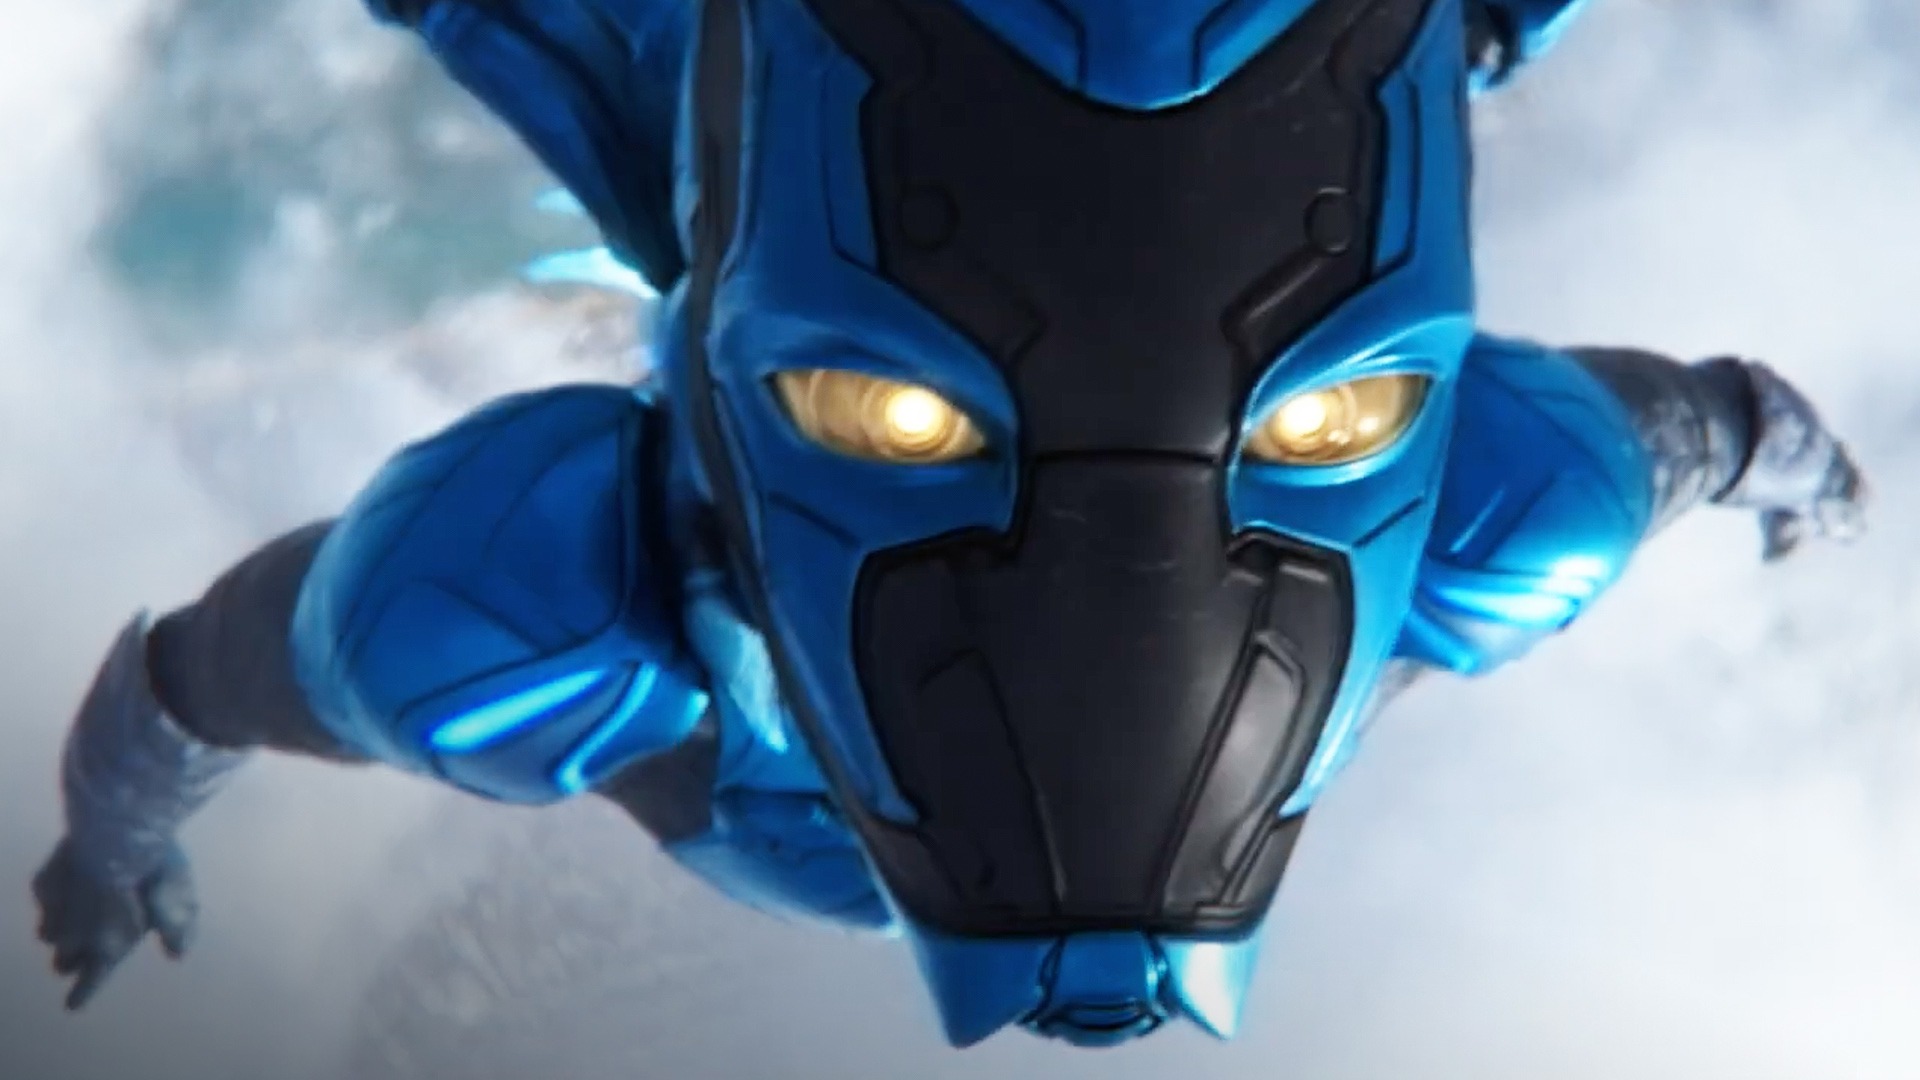 Here's How You Can Watch 'Blue Beetle' in Spanish at Movie Theaters